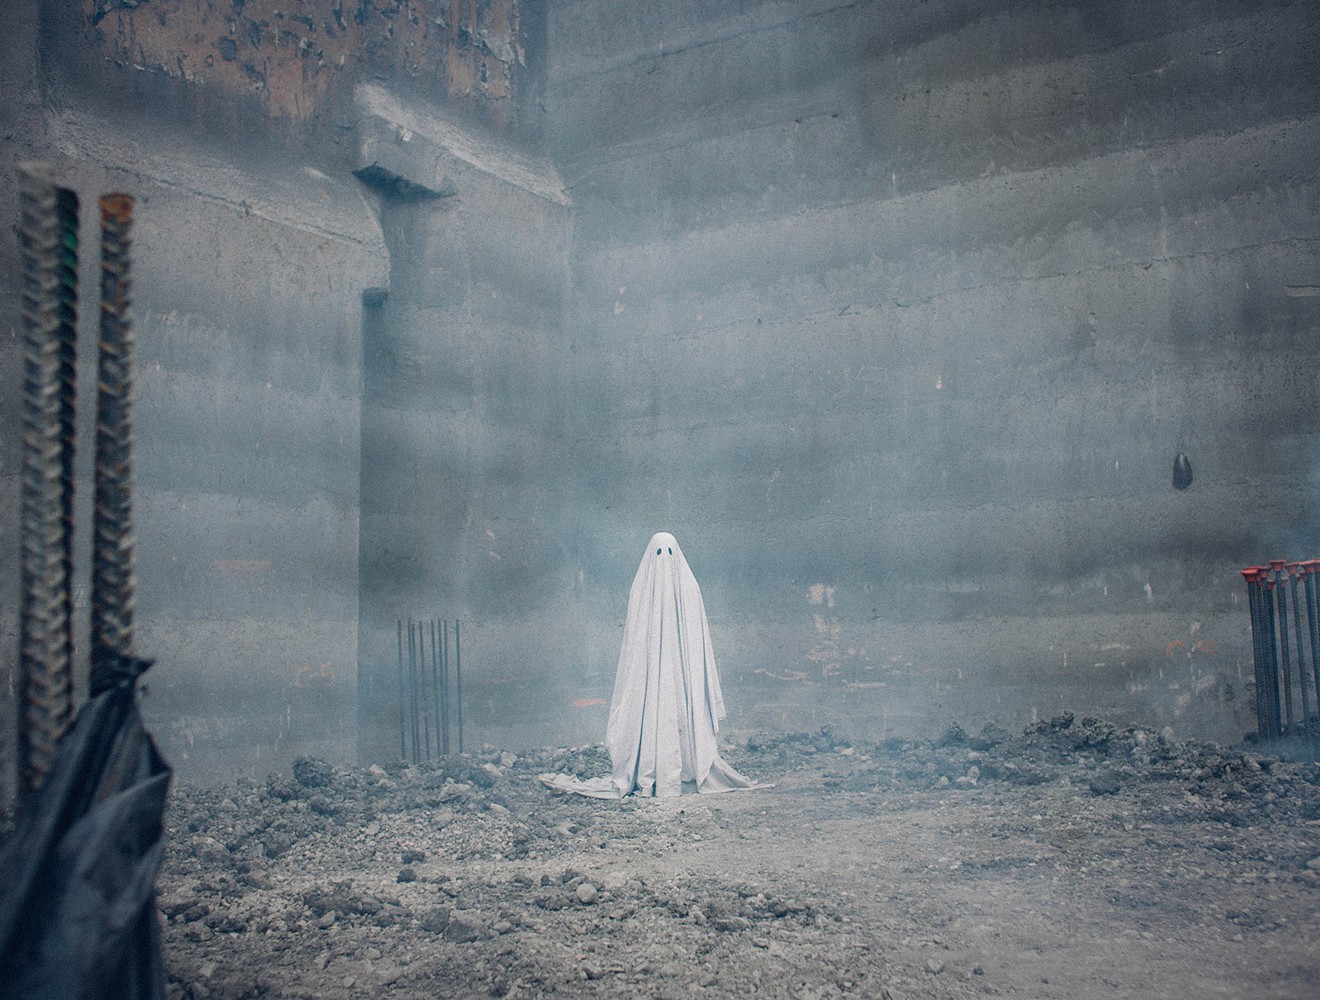 A Ghost Story gets a Texas premiere at the Oak Cliff Film Festival this week. Tickets for individual screenings start at $10.